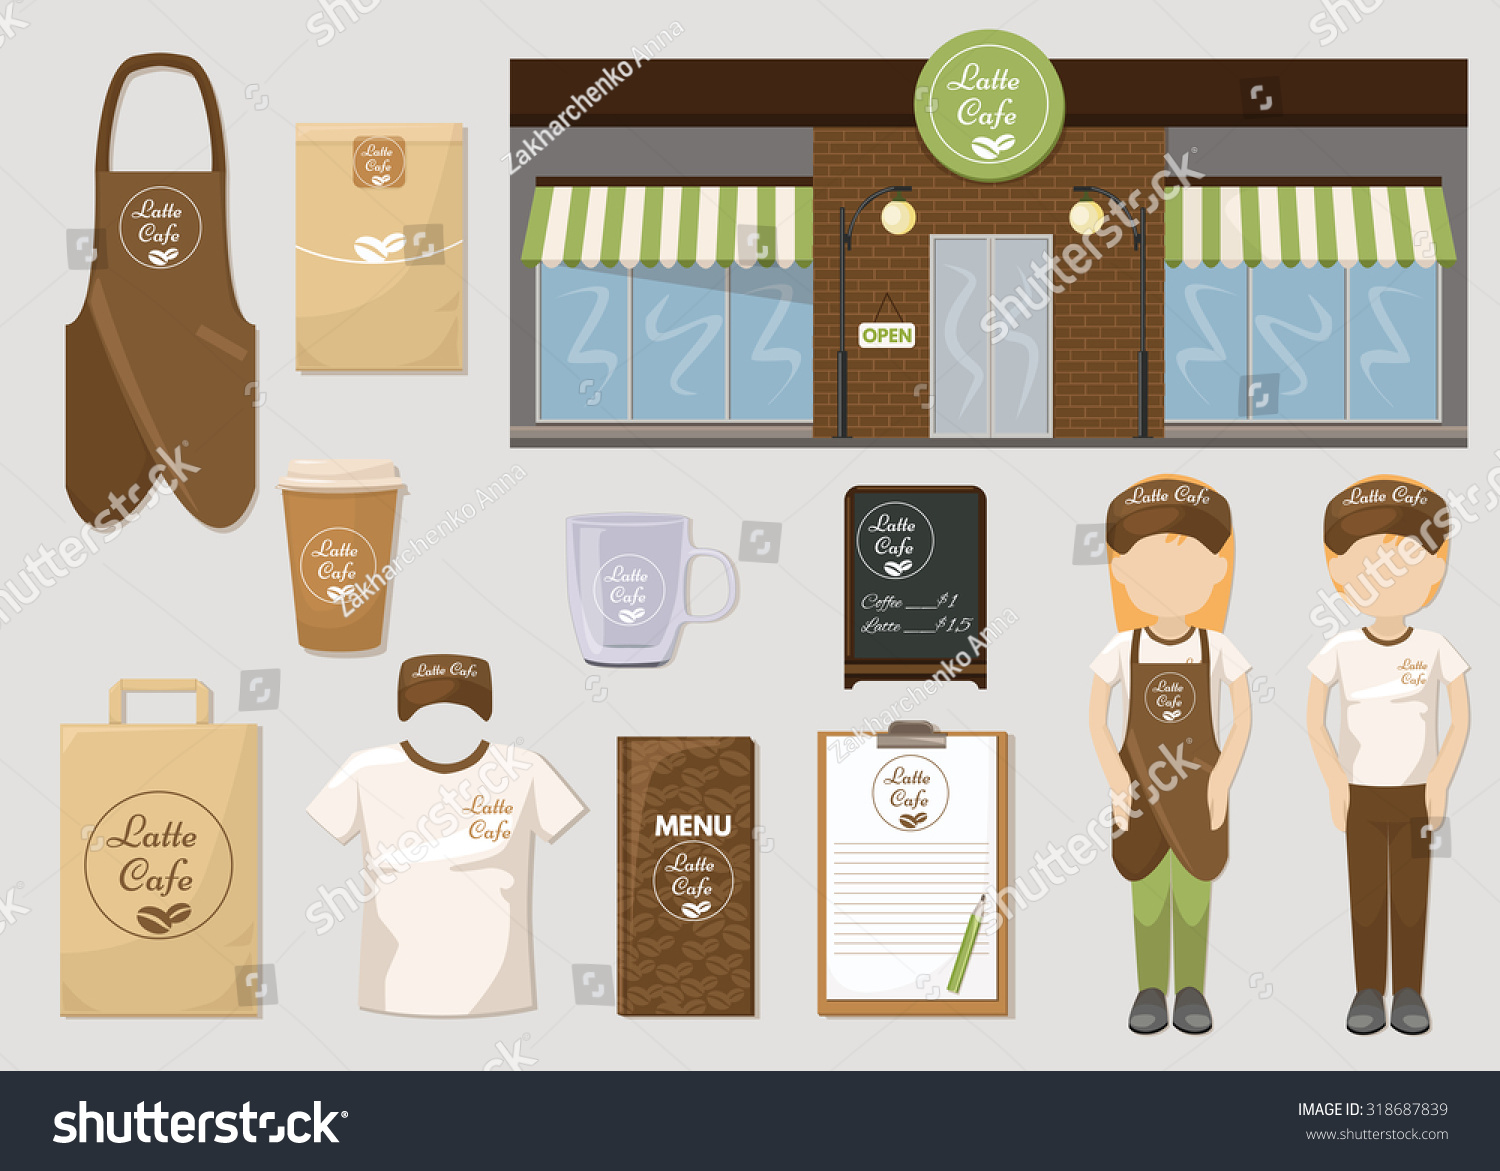 Set Cafe Restaurant Corporate Identity Mock Stock Vector Royalty Free 318687839 - cafe logo id roblox